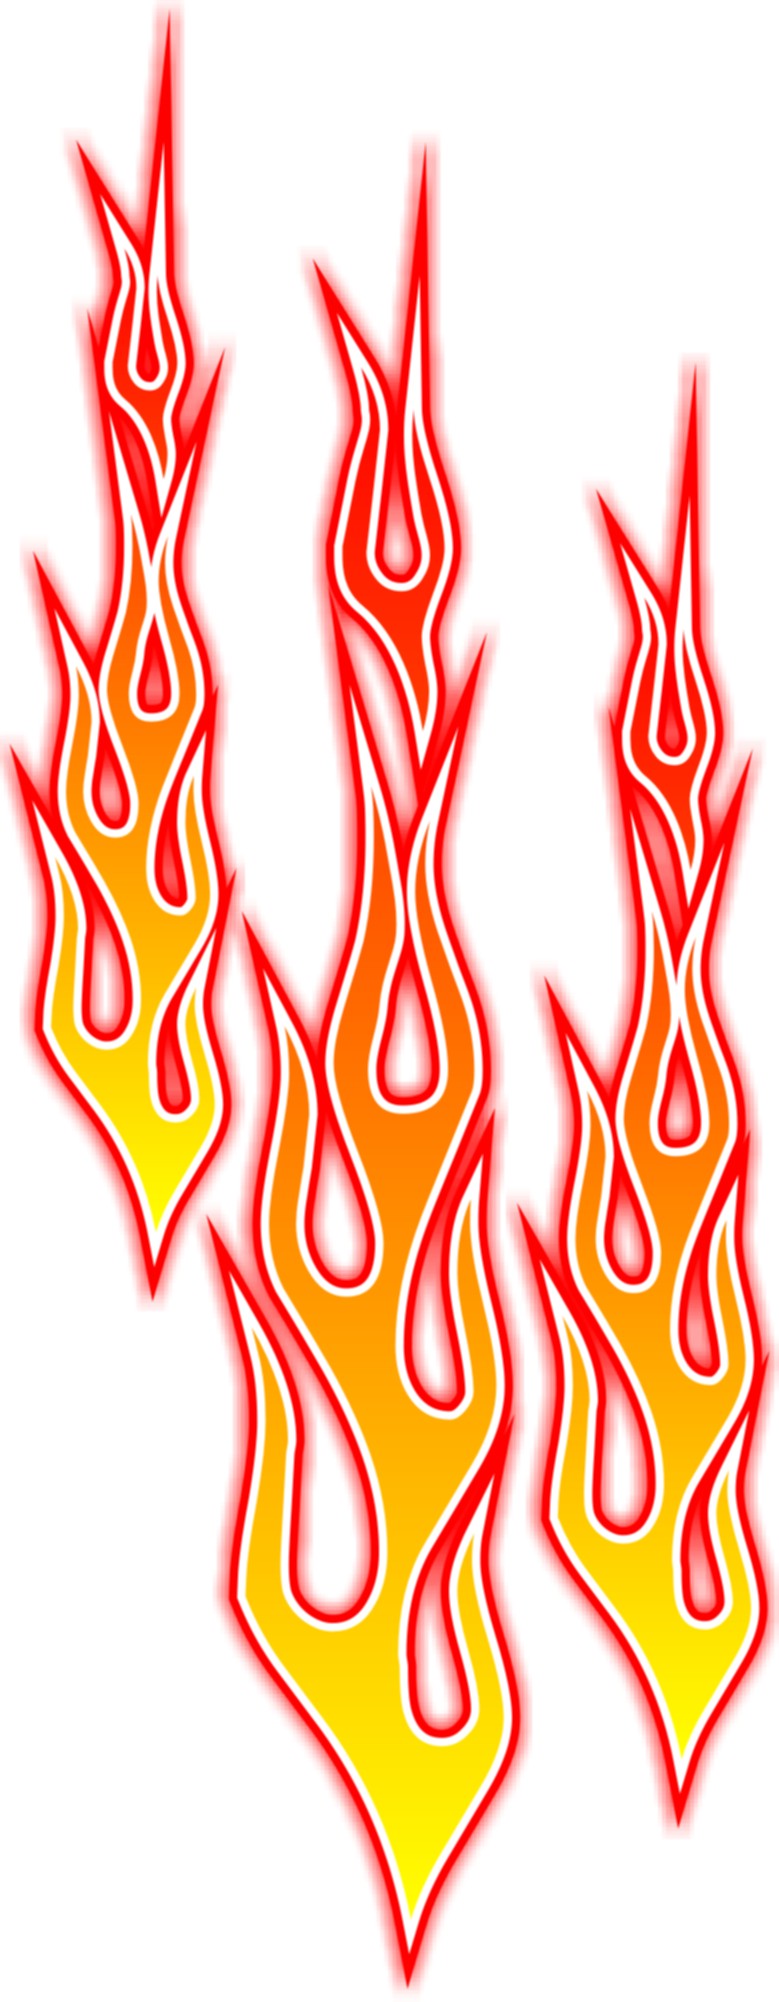 Flames free flame clipart the cliparts